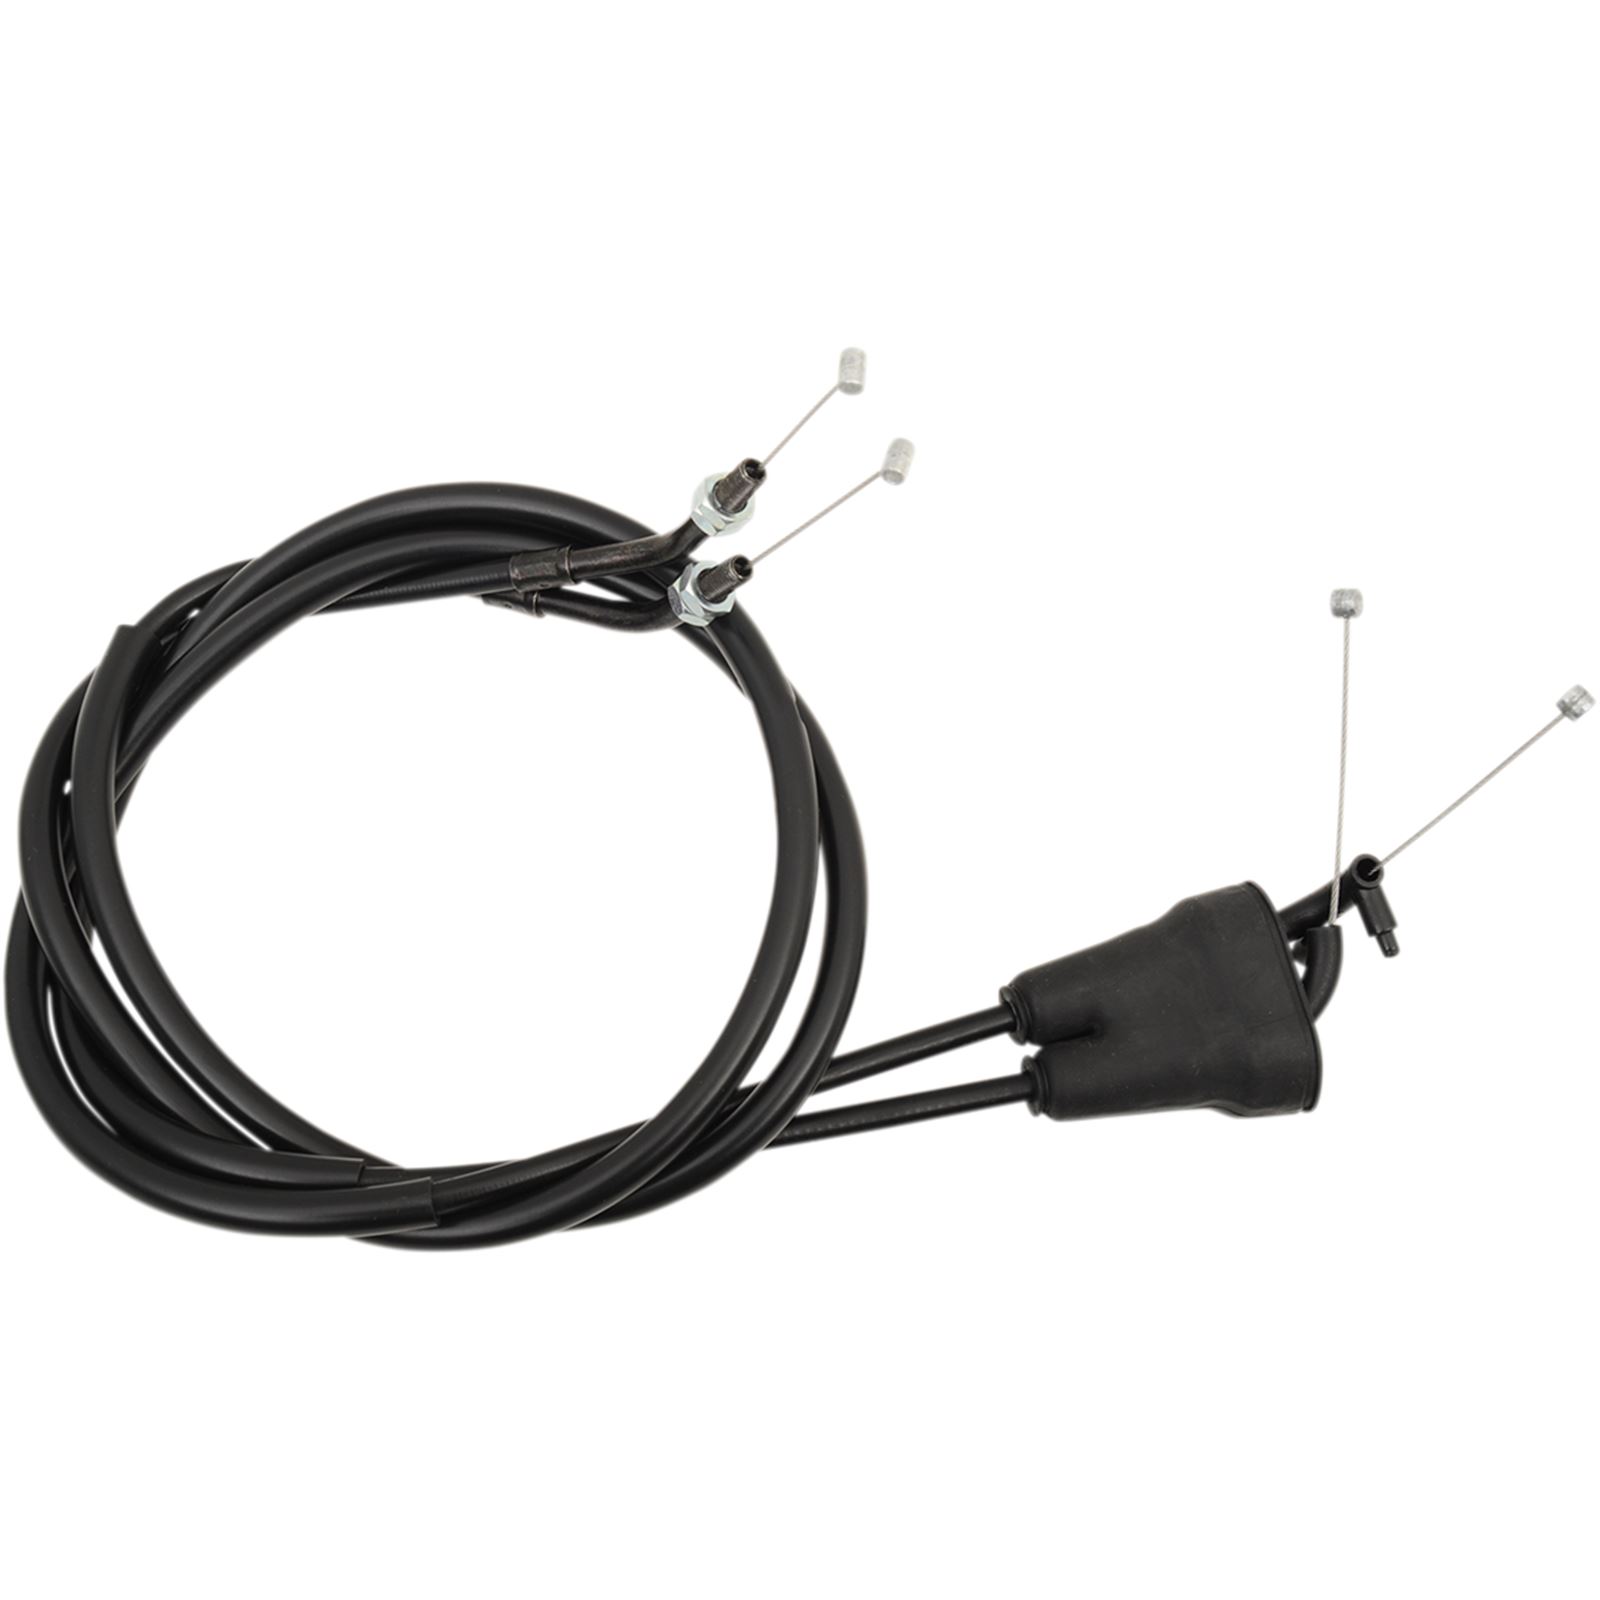 Moose Racing Throttle Cable for KTM